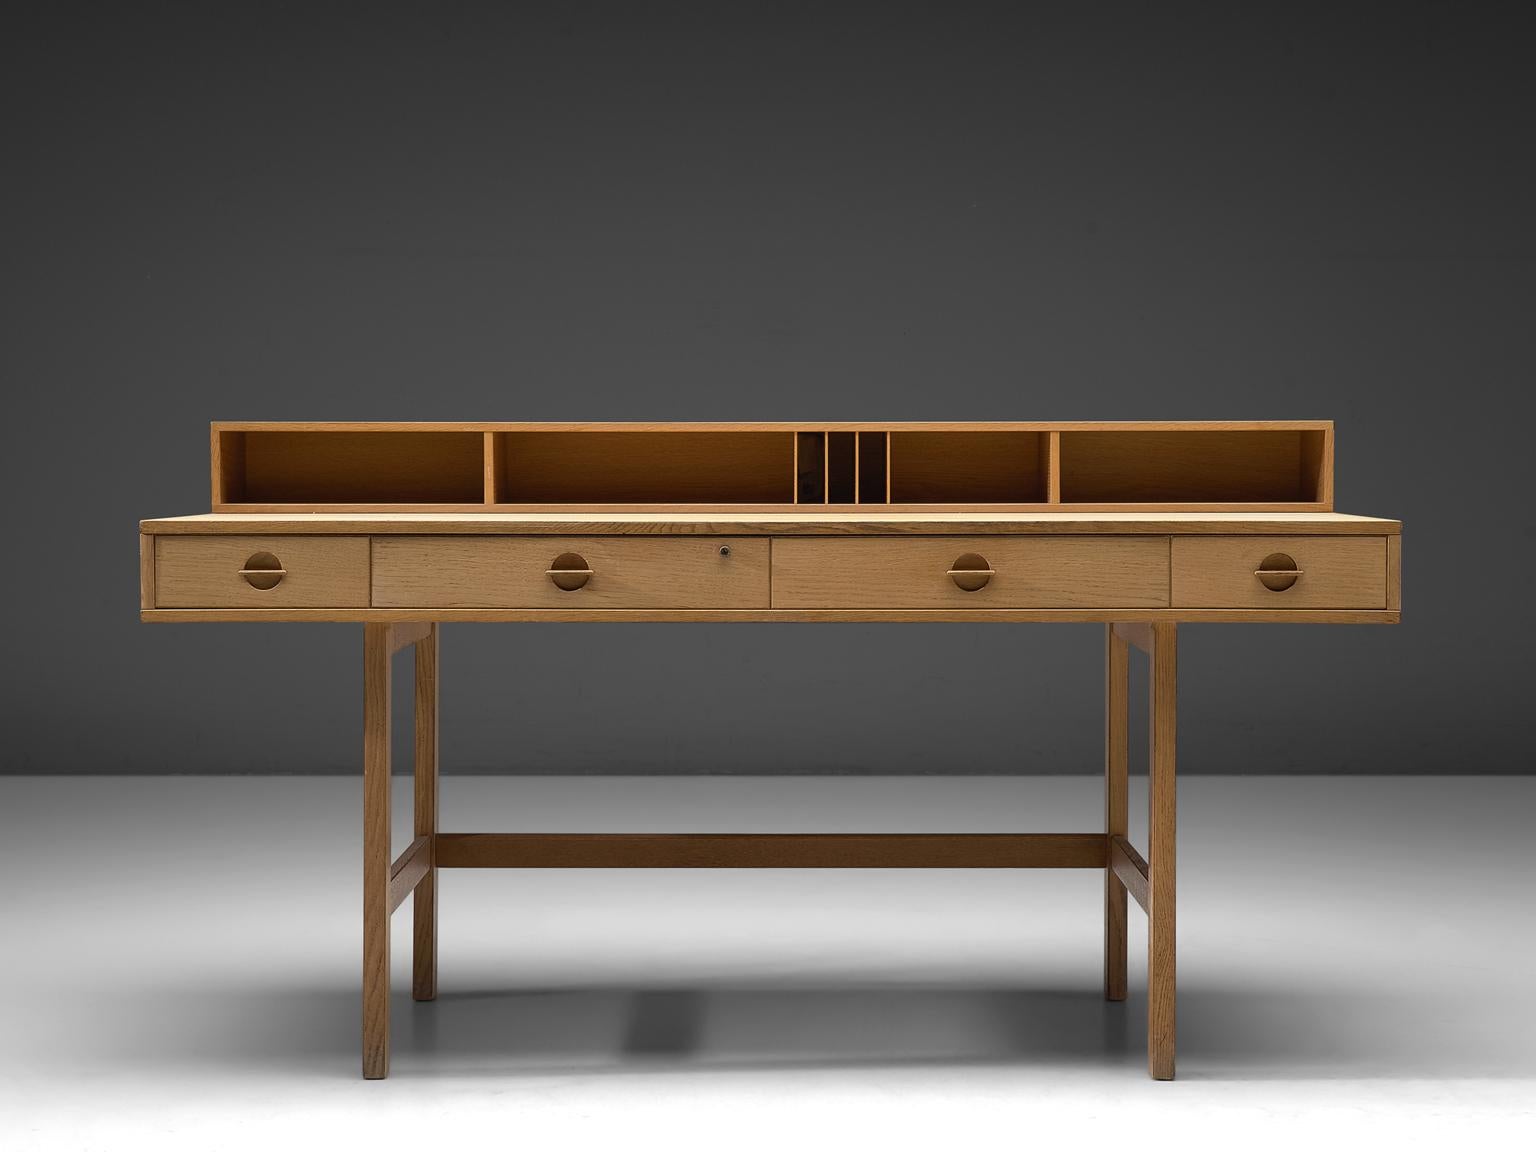 'Flip-top' desk by Jens Quistgaard for Peter Løvig Nielsen, oak, Denmark, 1960s. 

This secretary shelf and writing table has a storage element that can be flipped
down to extend the desk top for more working space instead. The front of the desk